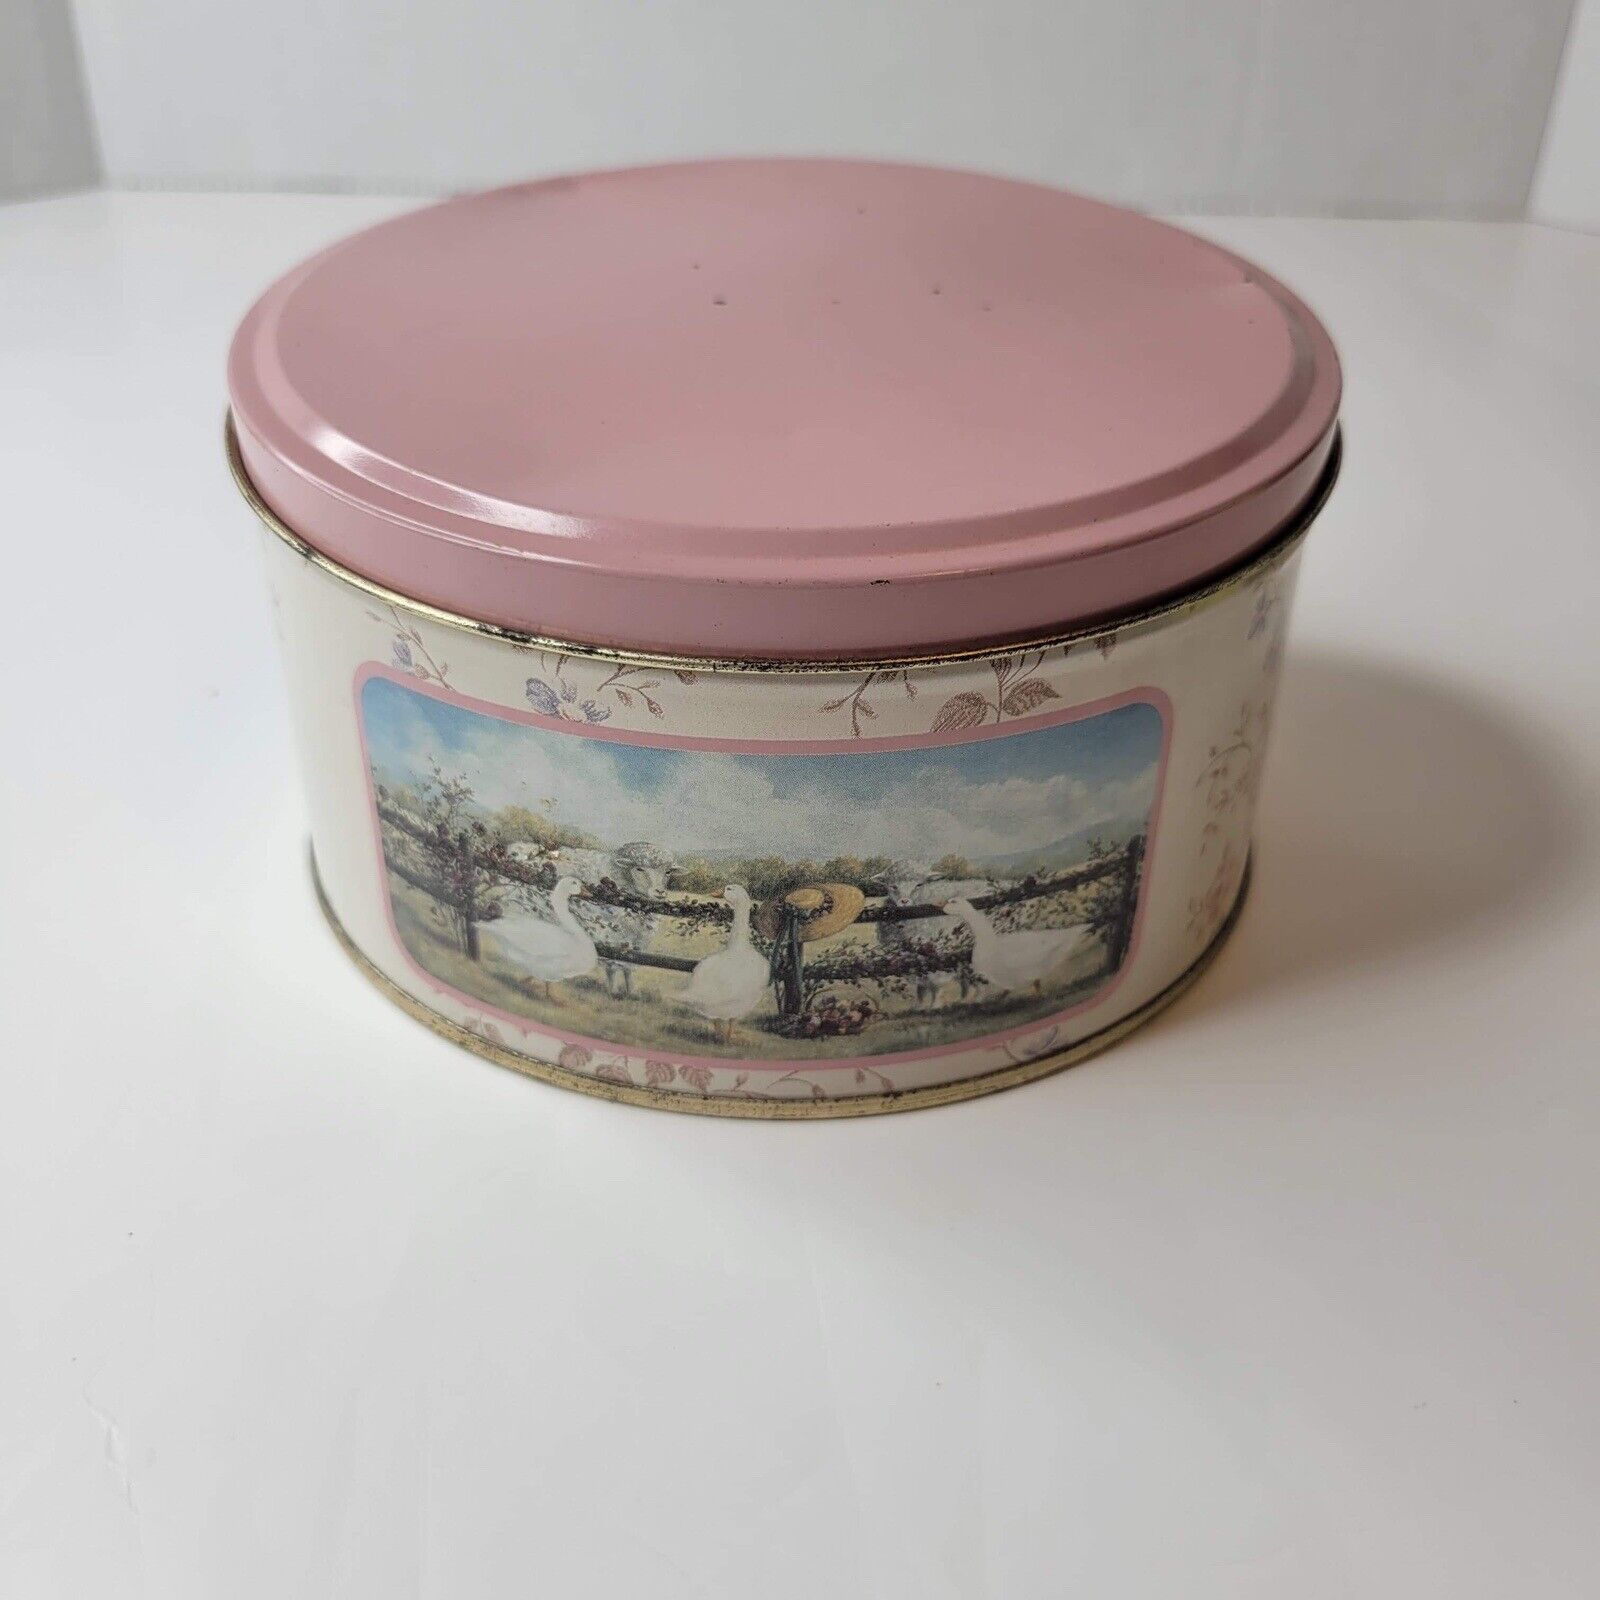 1988 the wild roses collection canister by Glenda Turley